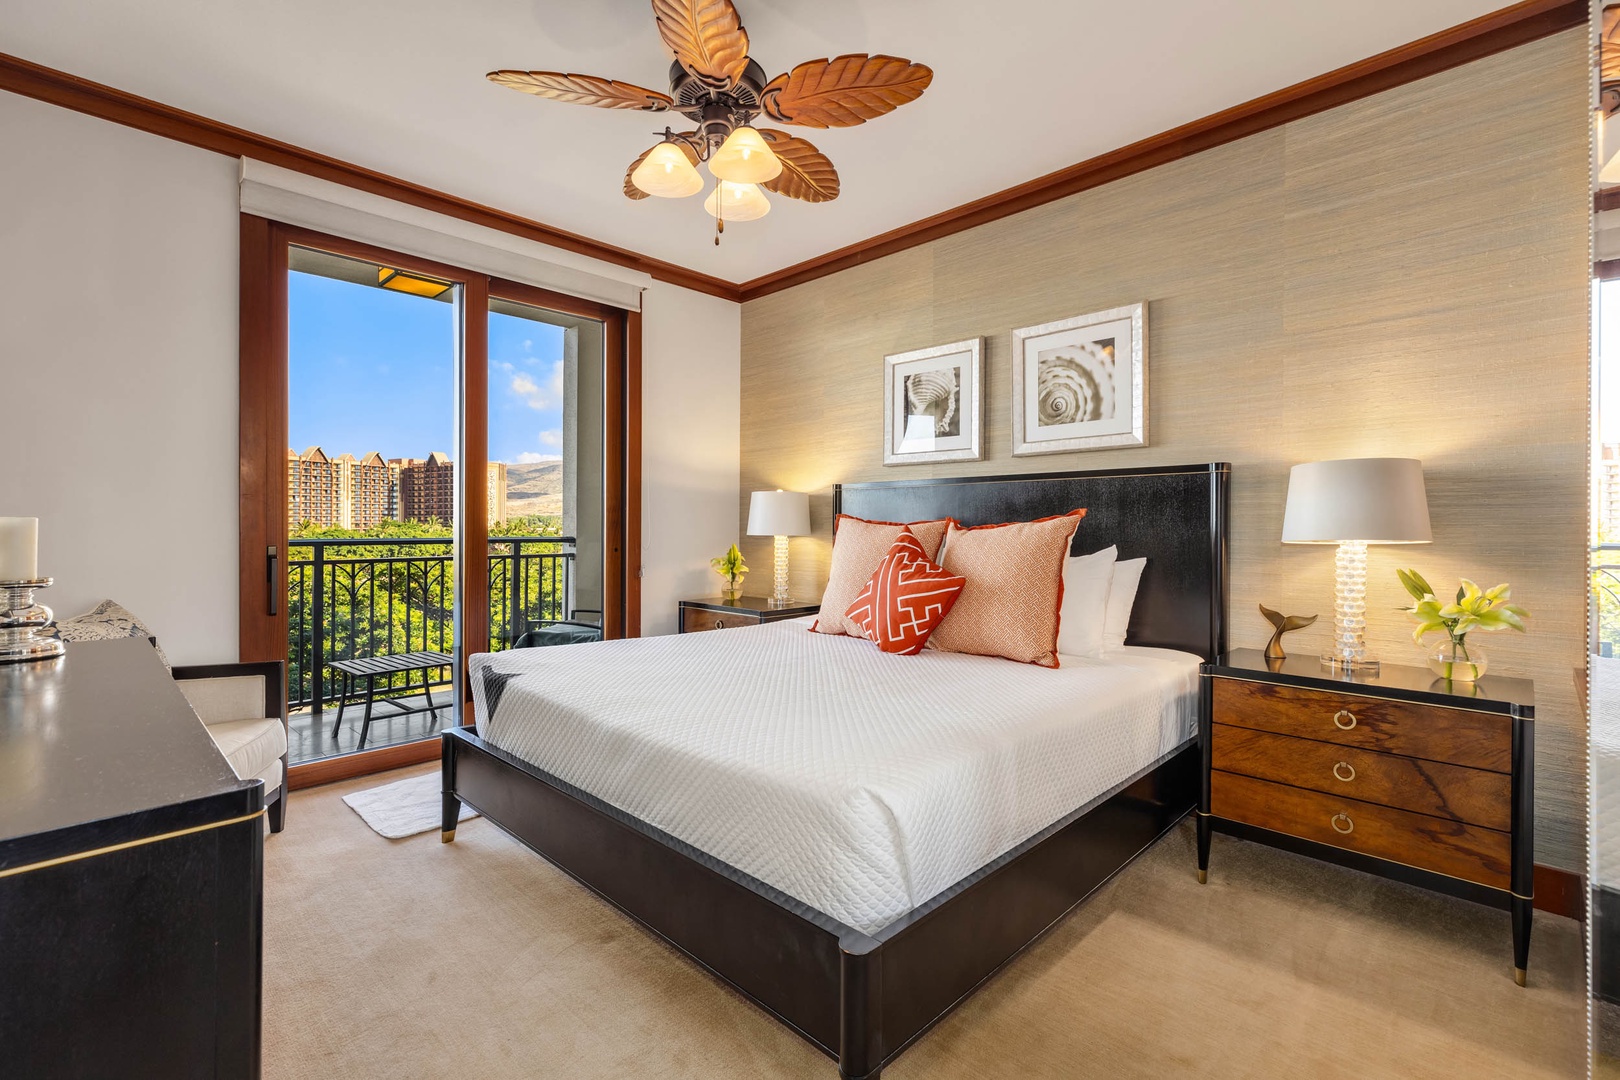 Kapolei Vacation Rentals, Ko Olina Beach Villa B604 - Luxurious primary suite boasting a king bed and a tailored walk-in closet, and access to private lanai.